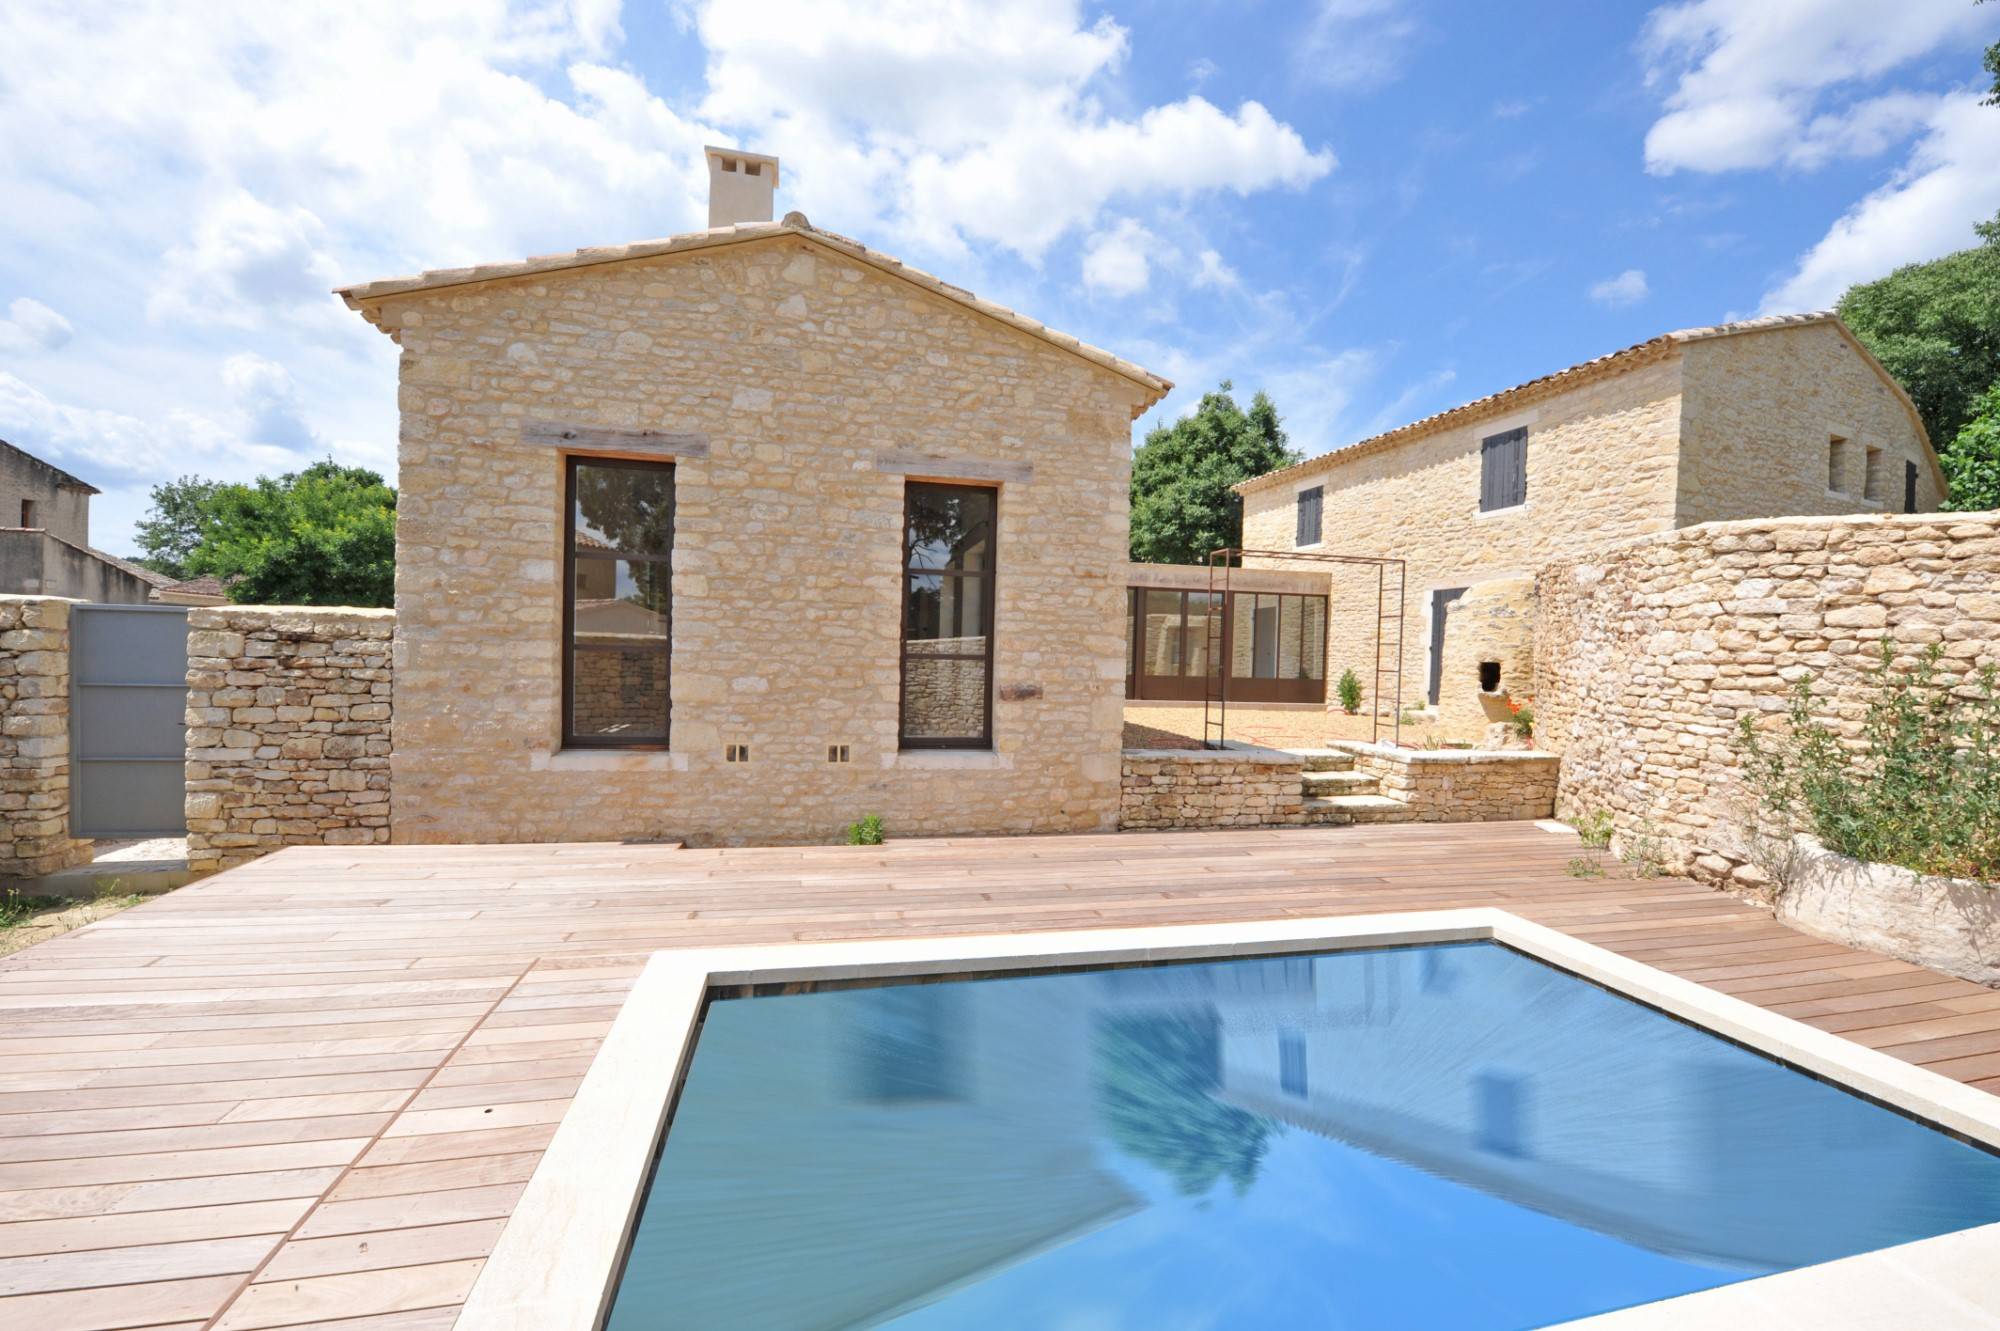 Village house with patio and pool